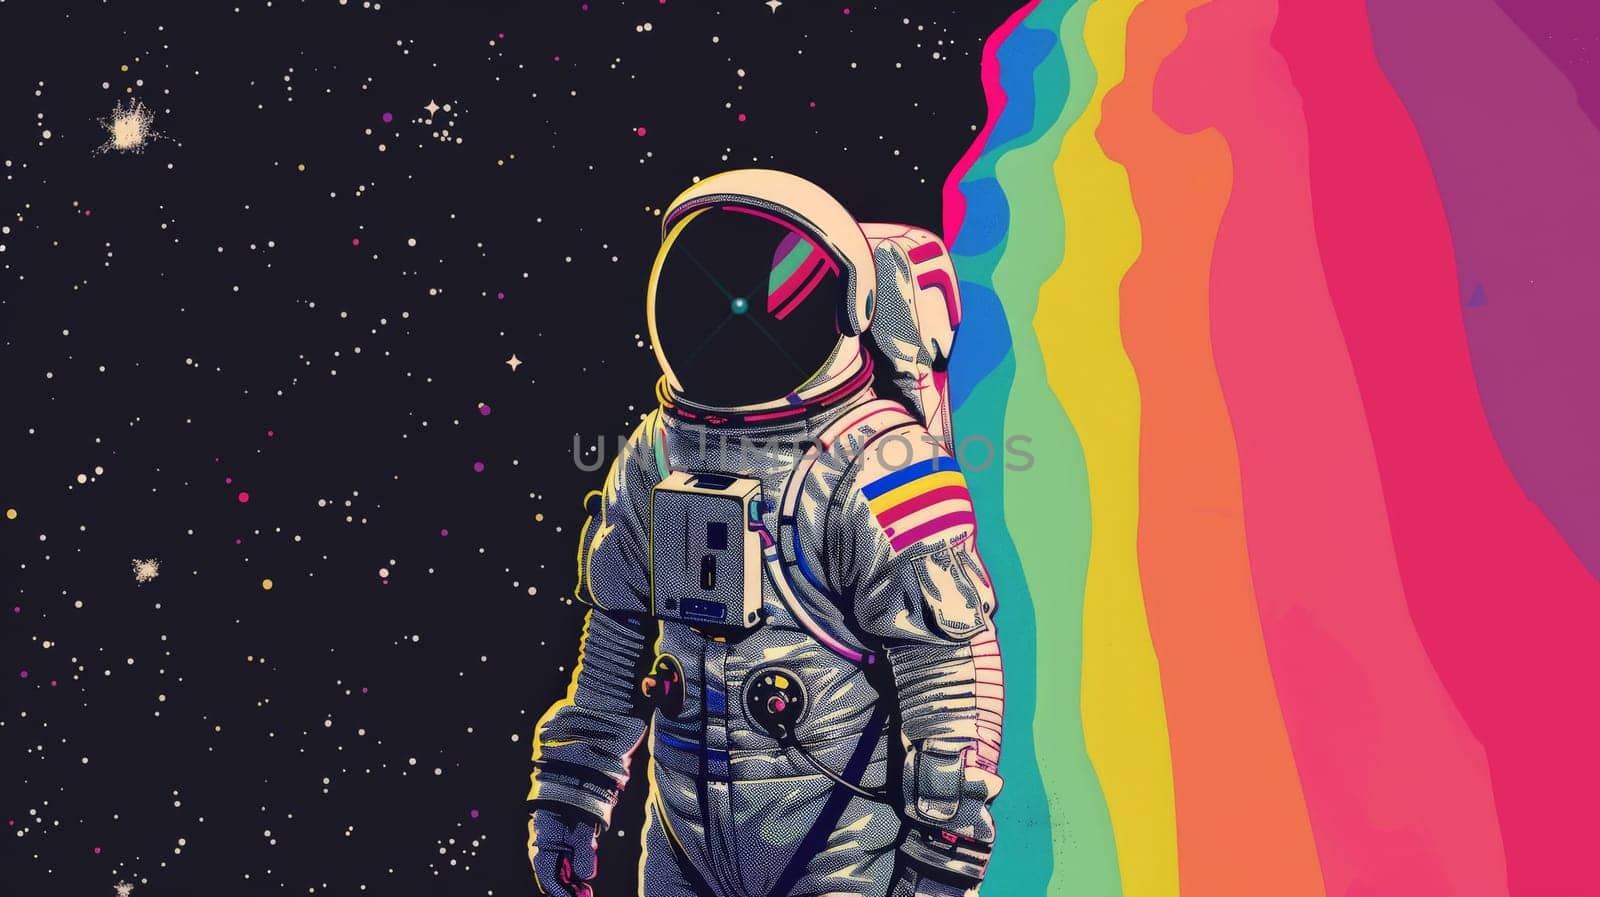 Abstract wallpaper of an astronaut in space with rainbow, Colorful art of astronaut in the space by nijieimu